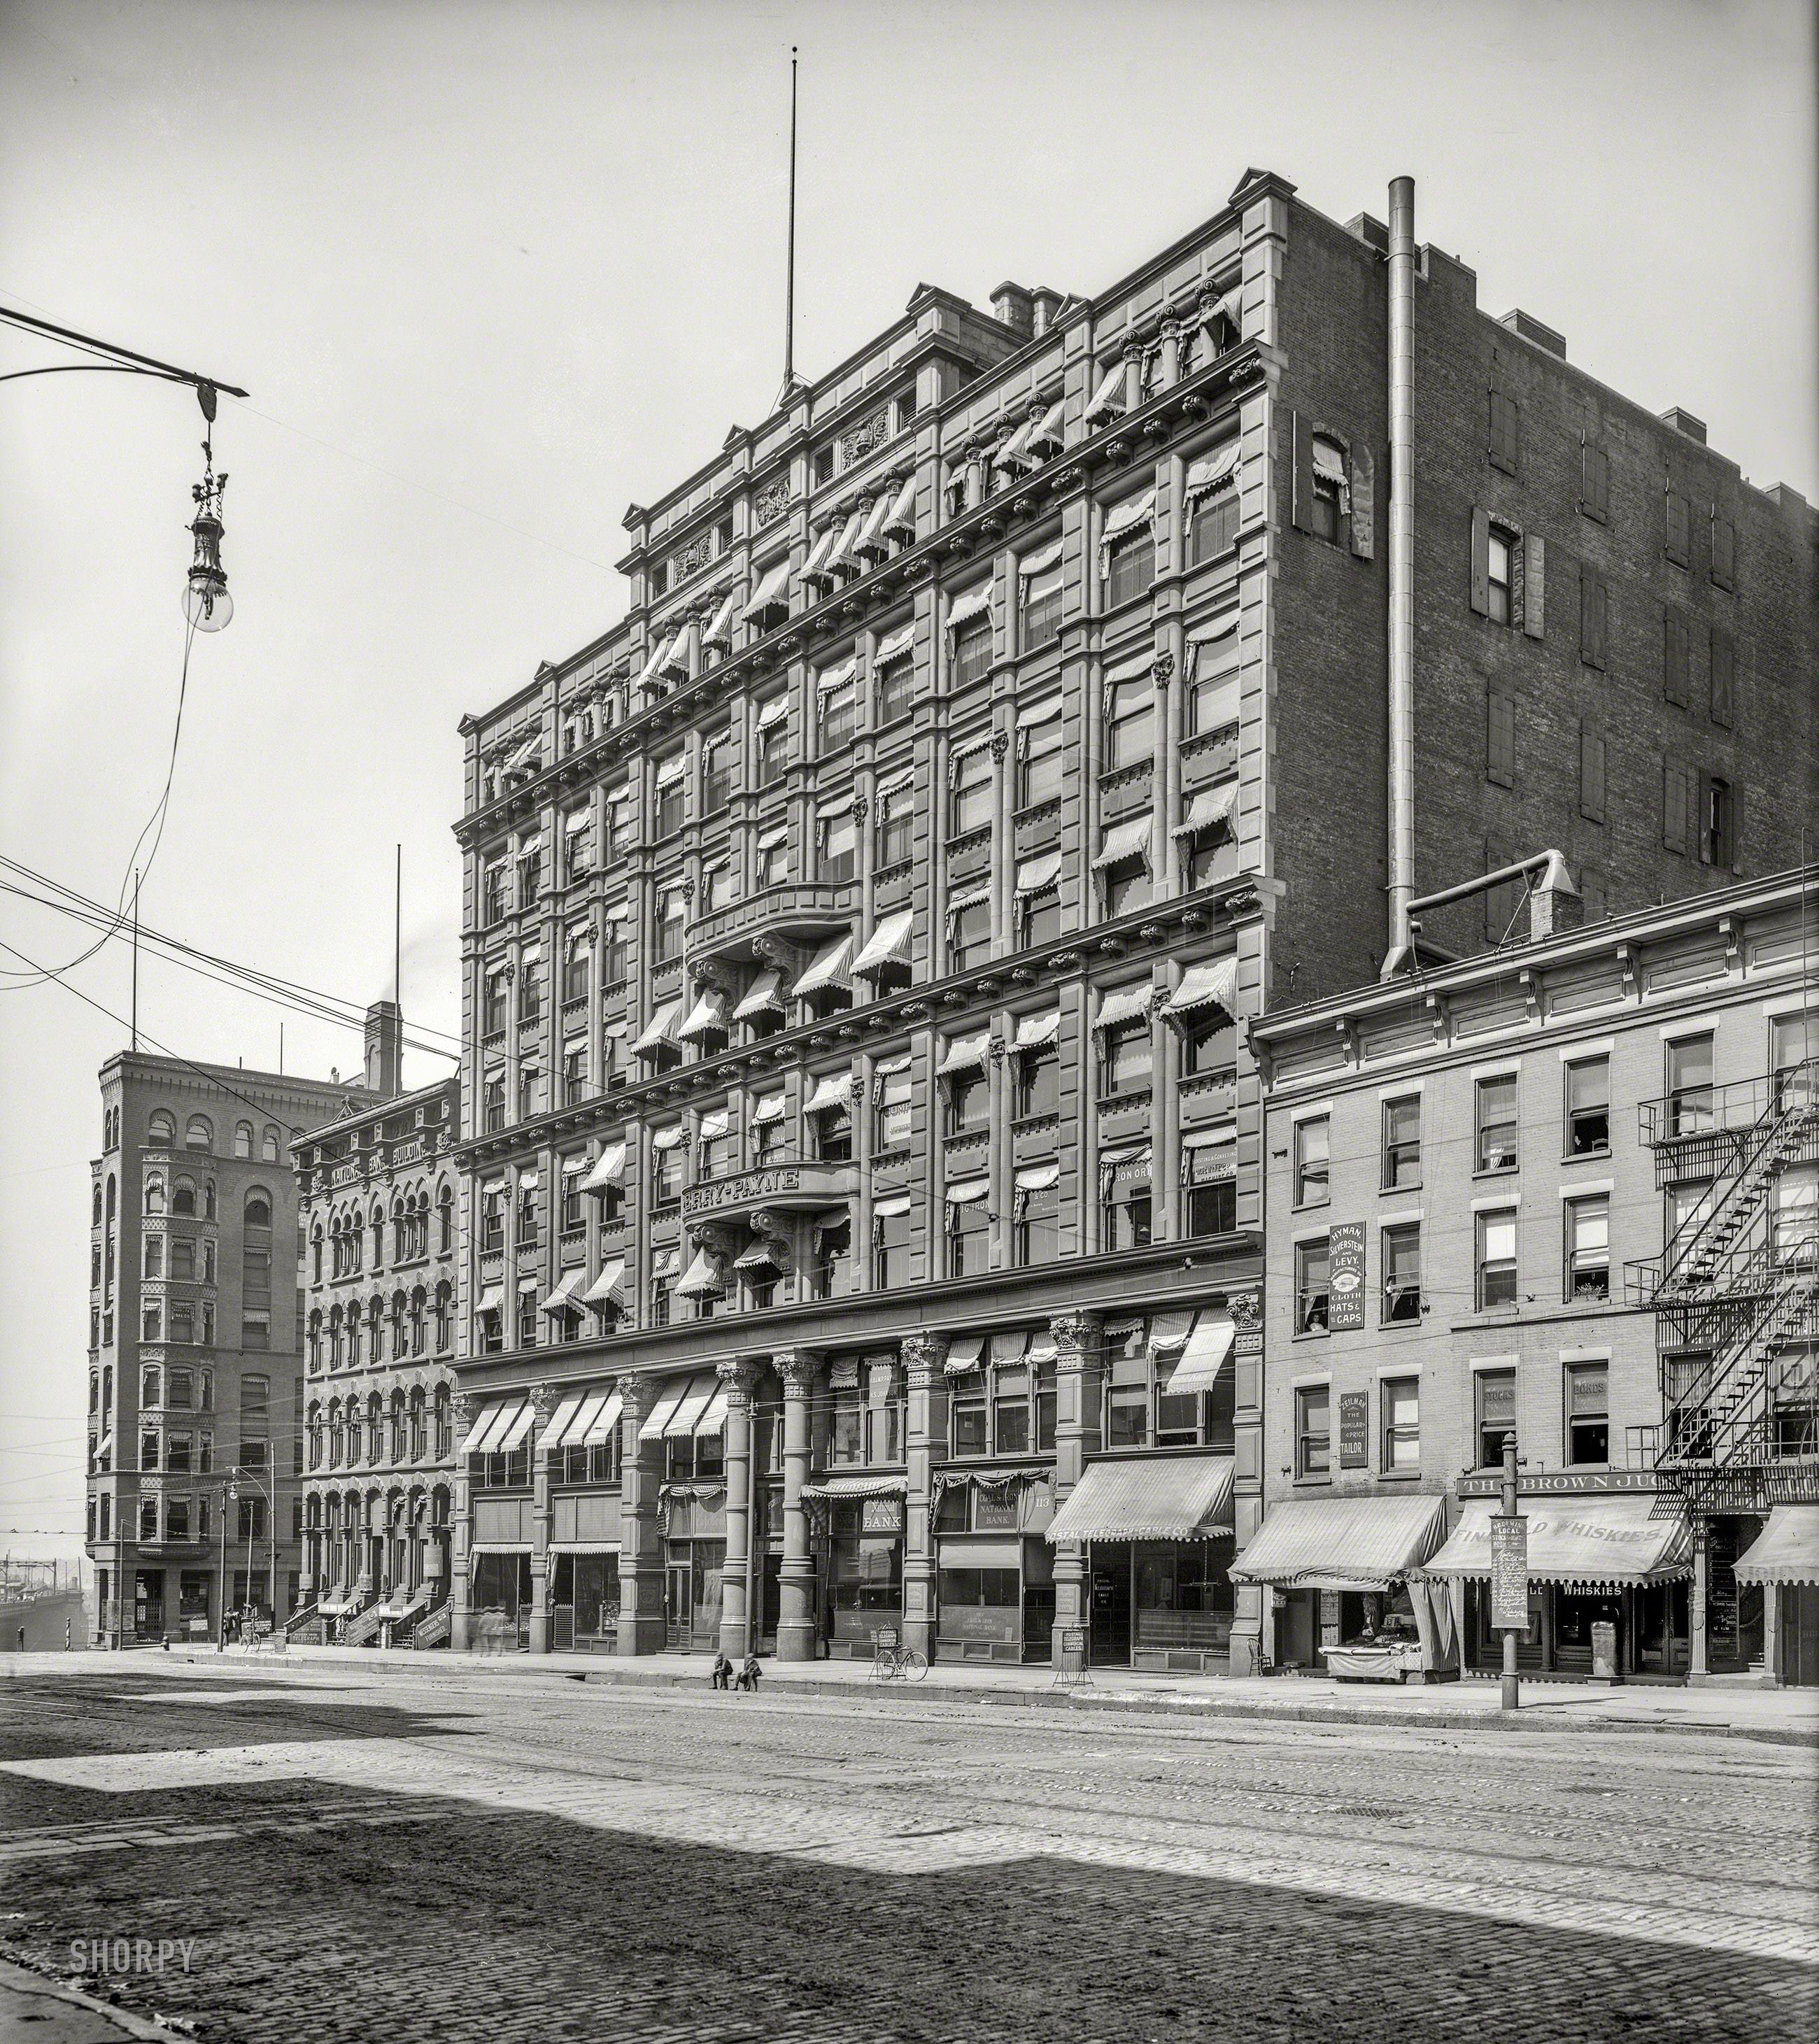 Cleveland circa 1900. "Perry-Payne Building, Superior Avenue." This fine old structure, completed in 1888, survives today as an apartment building; the Brown Jug next door has, alas, evaporated along with its "Fine Old Whiskies." 8x10 inch dry plate glass negative, Detroit Publishing Company. View full size.